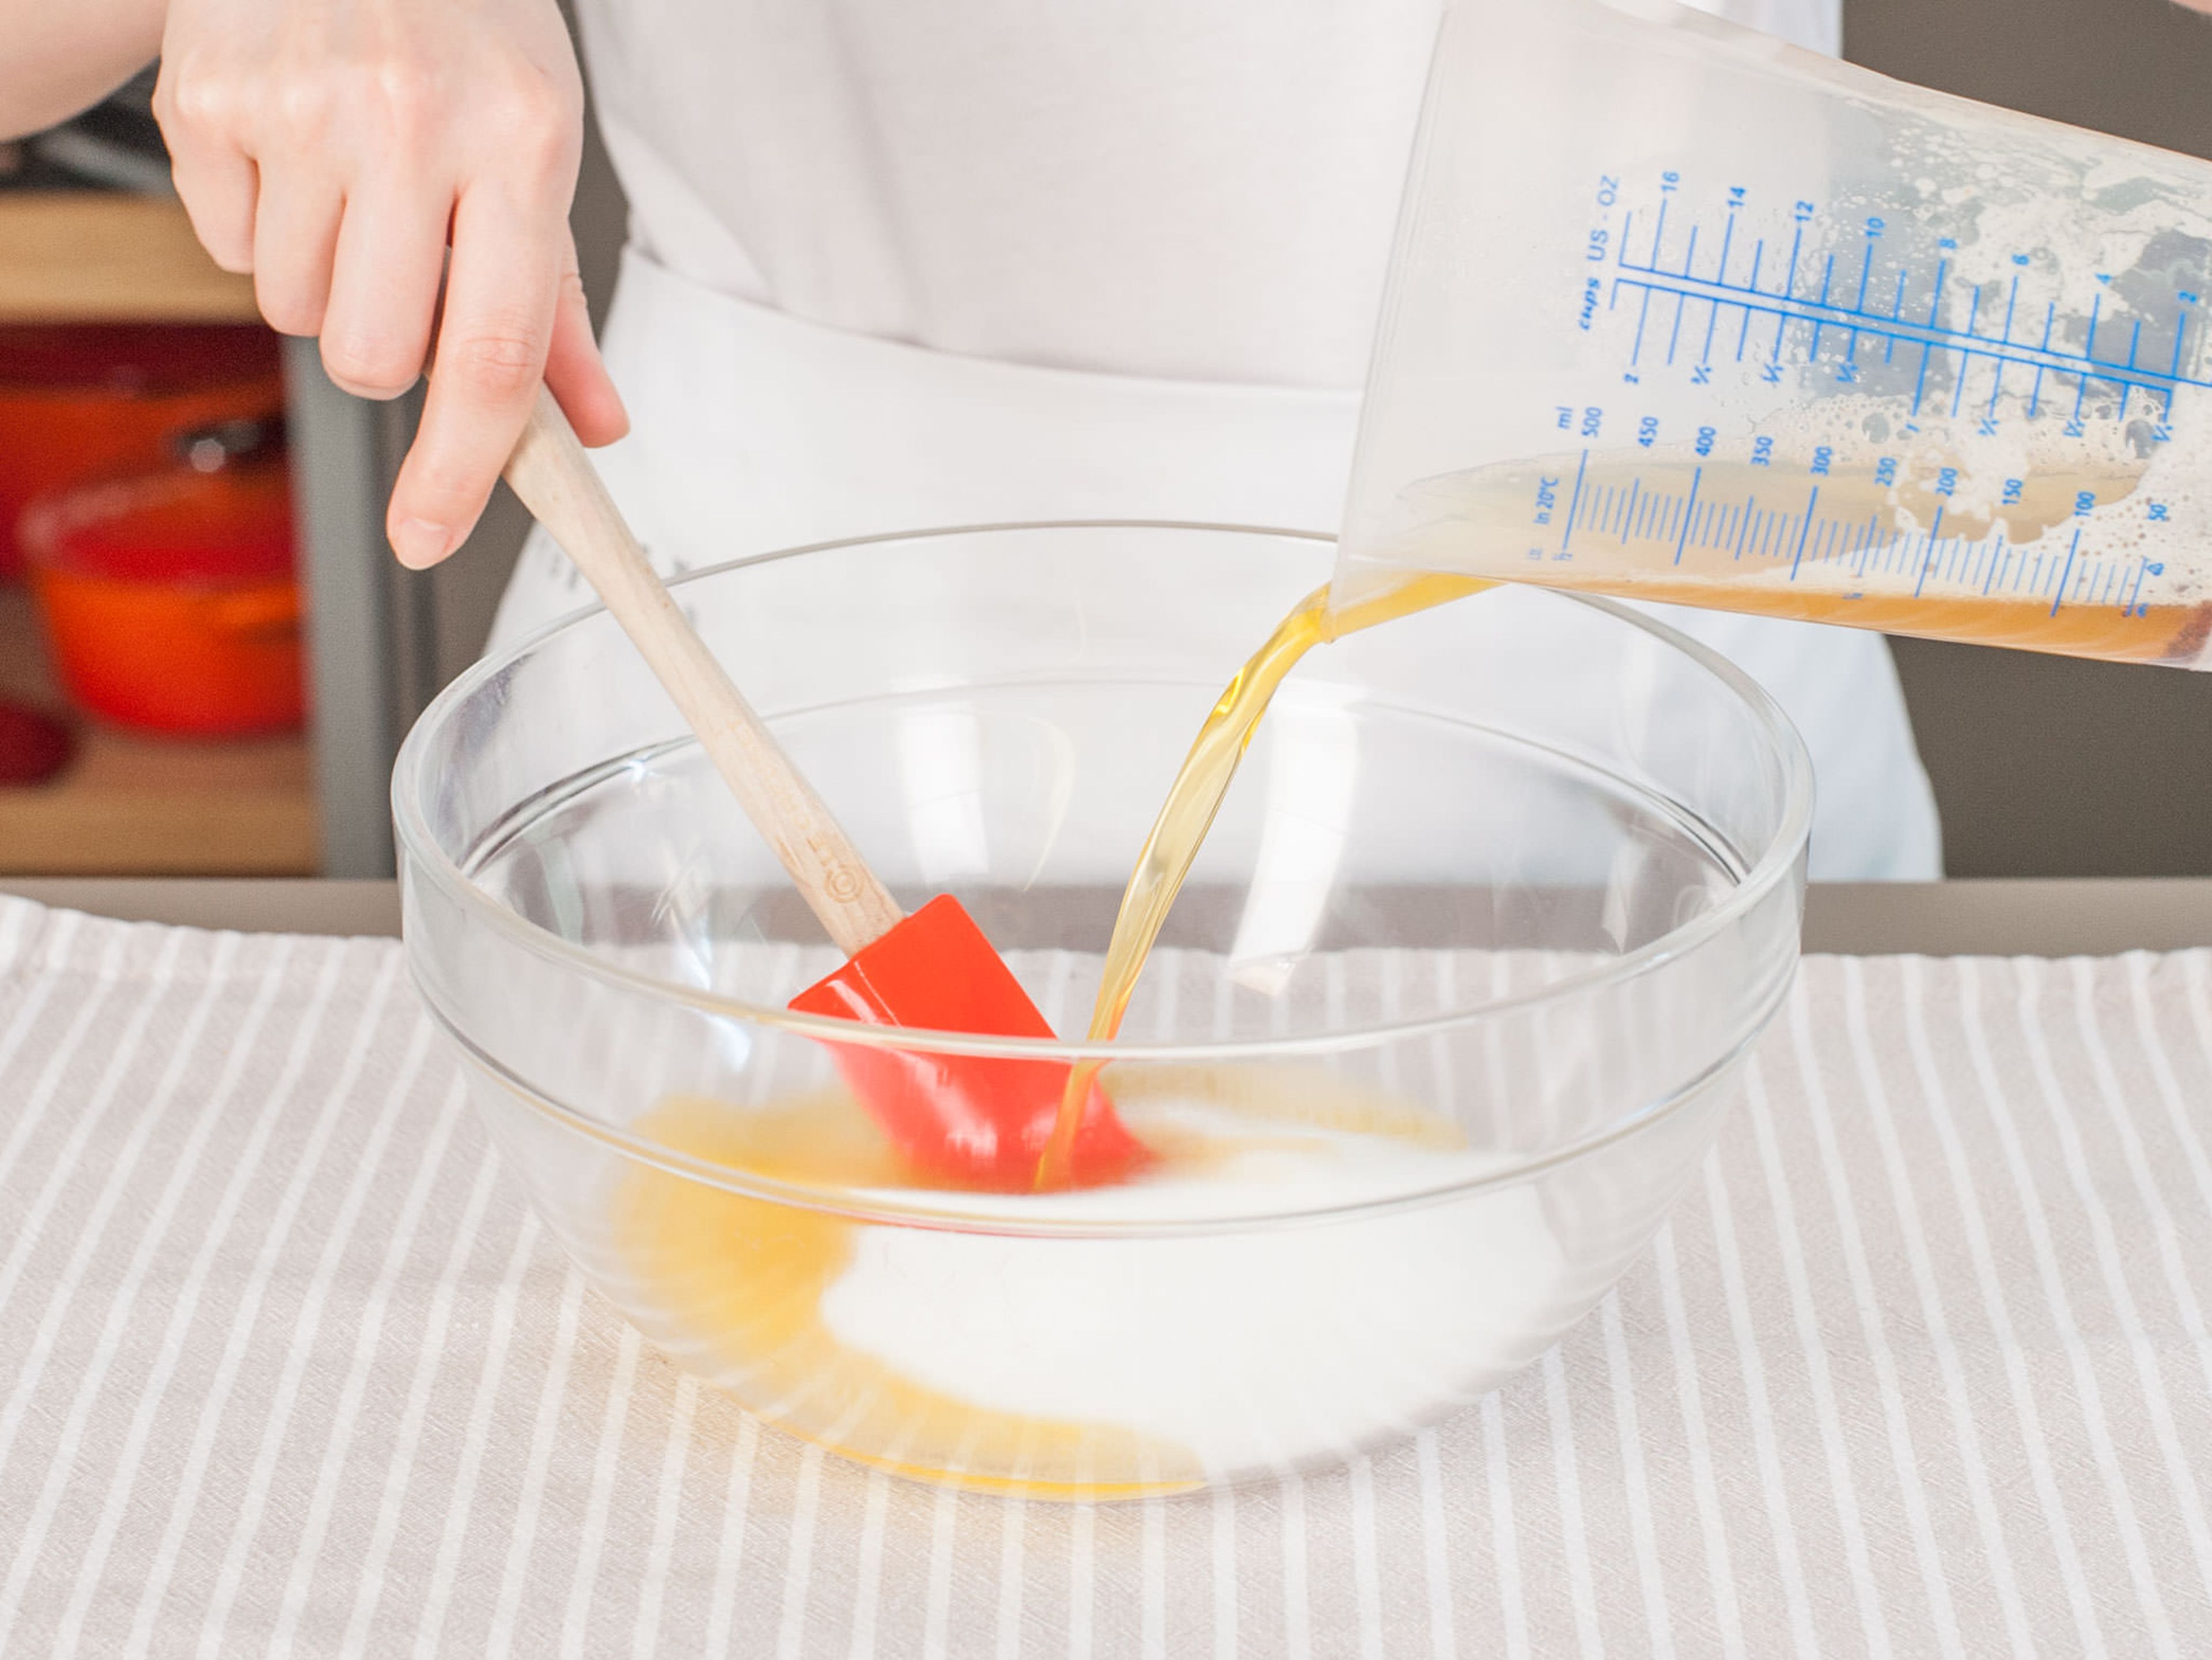 In a separate bowl, whisk together some of the brown butter and sugar. Add eggs one at a time, then vanilla extract.